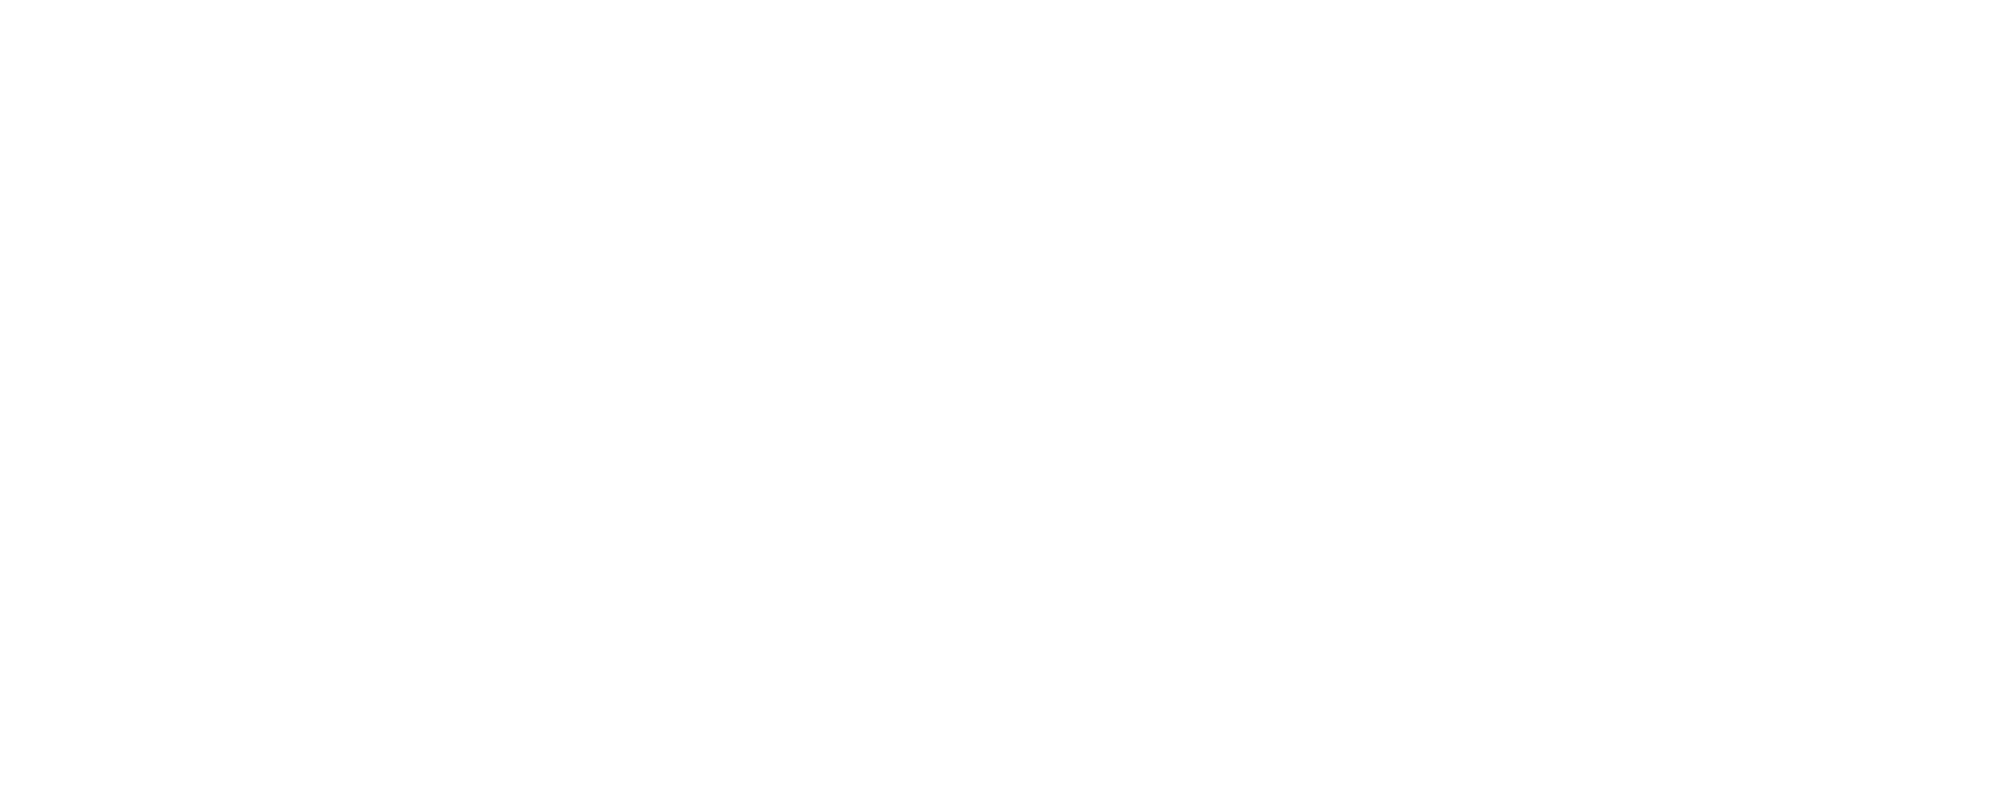 Content of bar graph explaining the reduction in stenosis regardless of calcification level